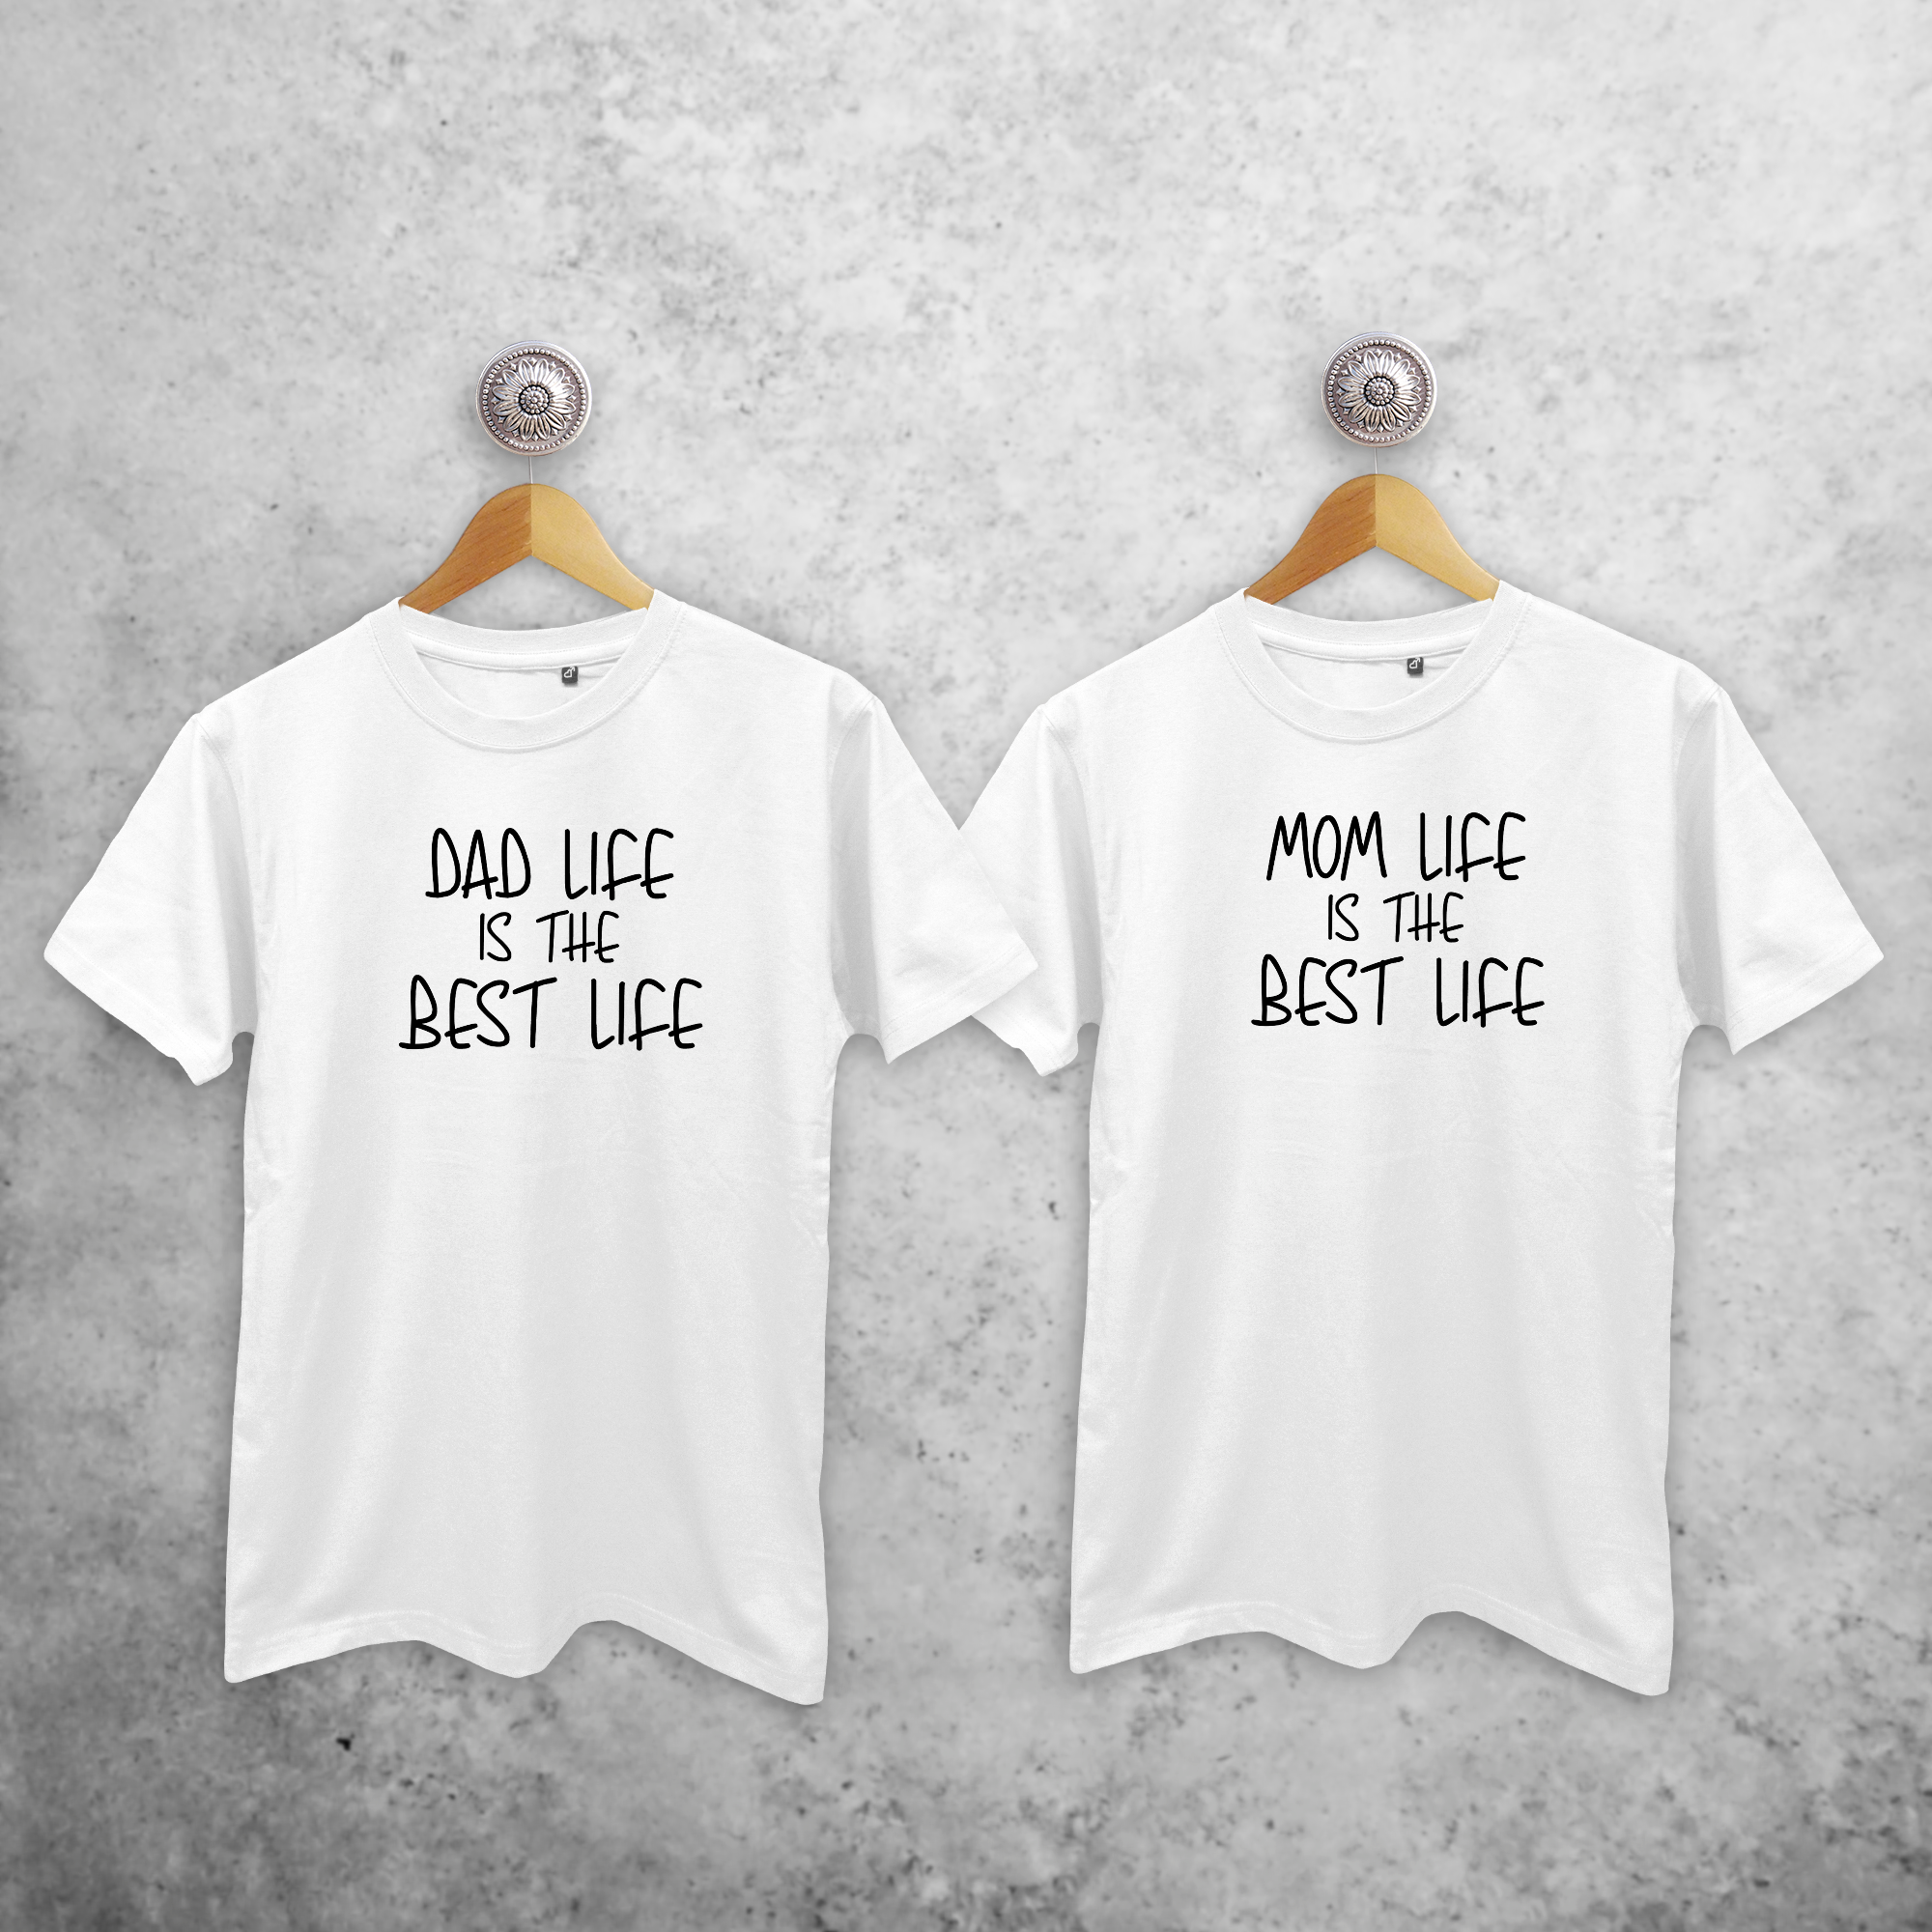 'Dad life is the best life' & 'Mom life is the best life' couples shirts